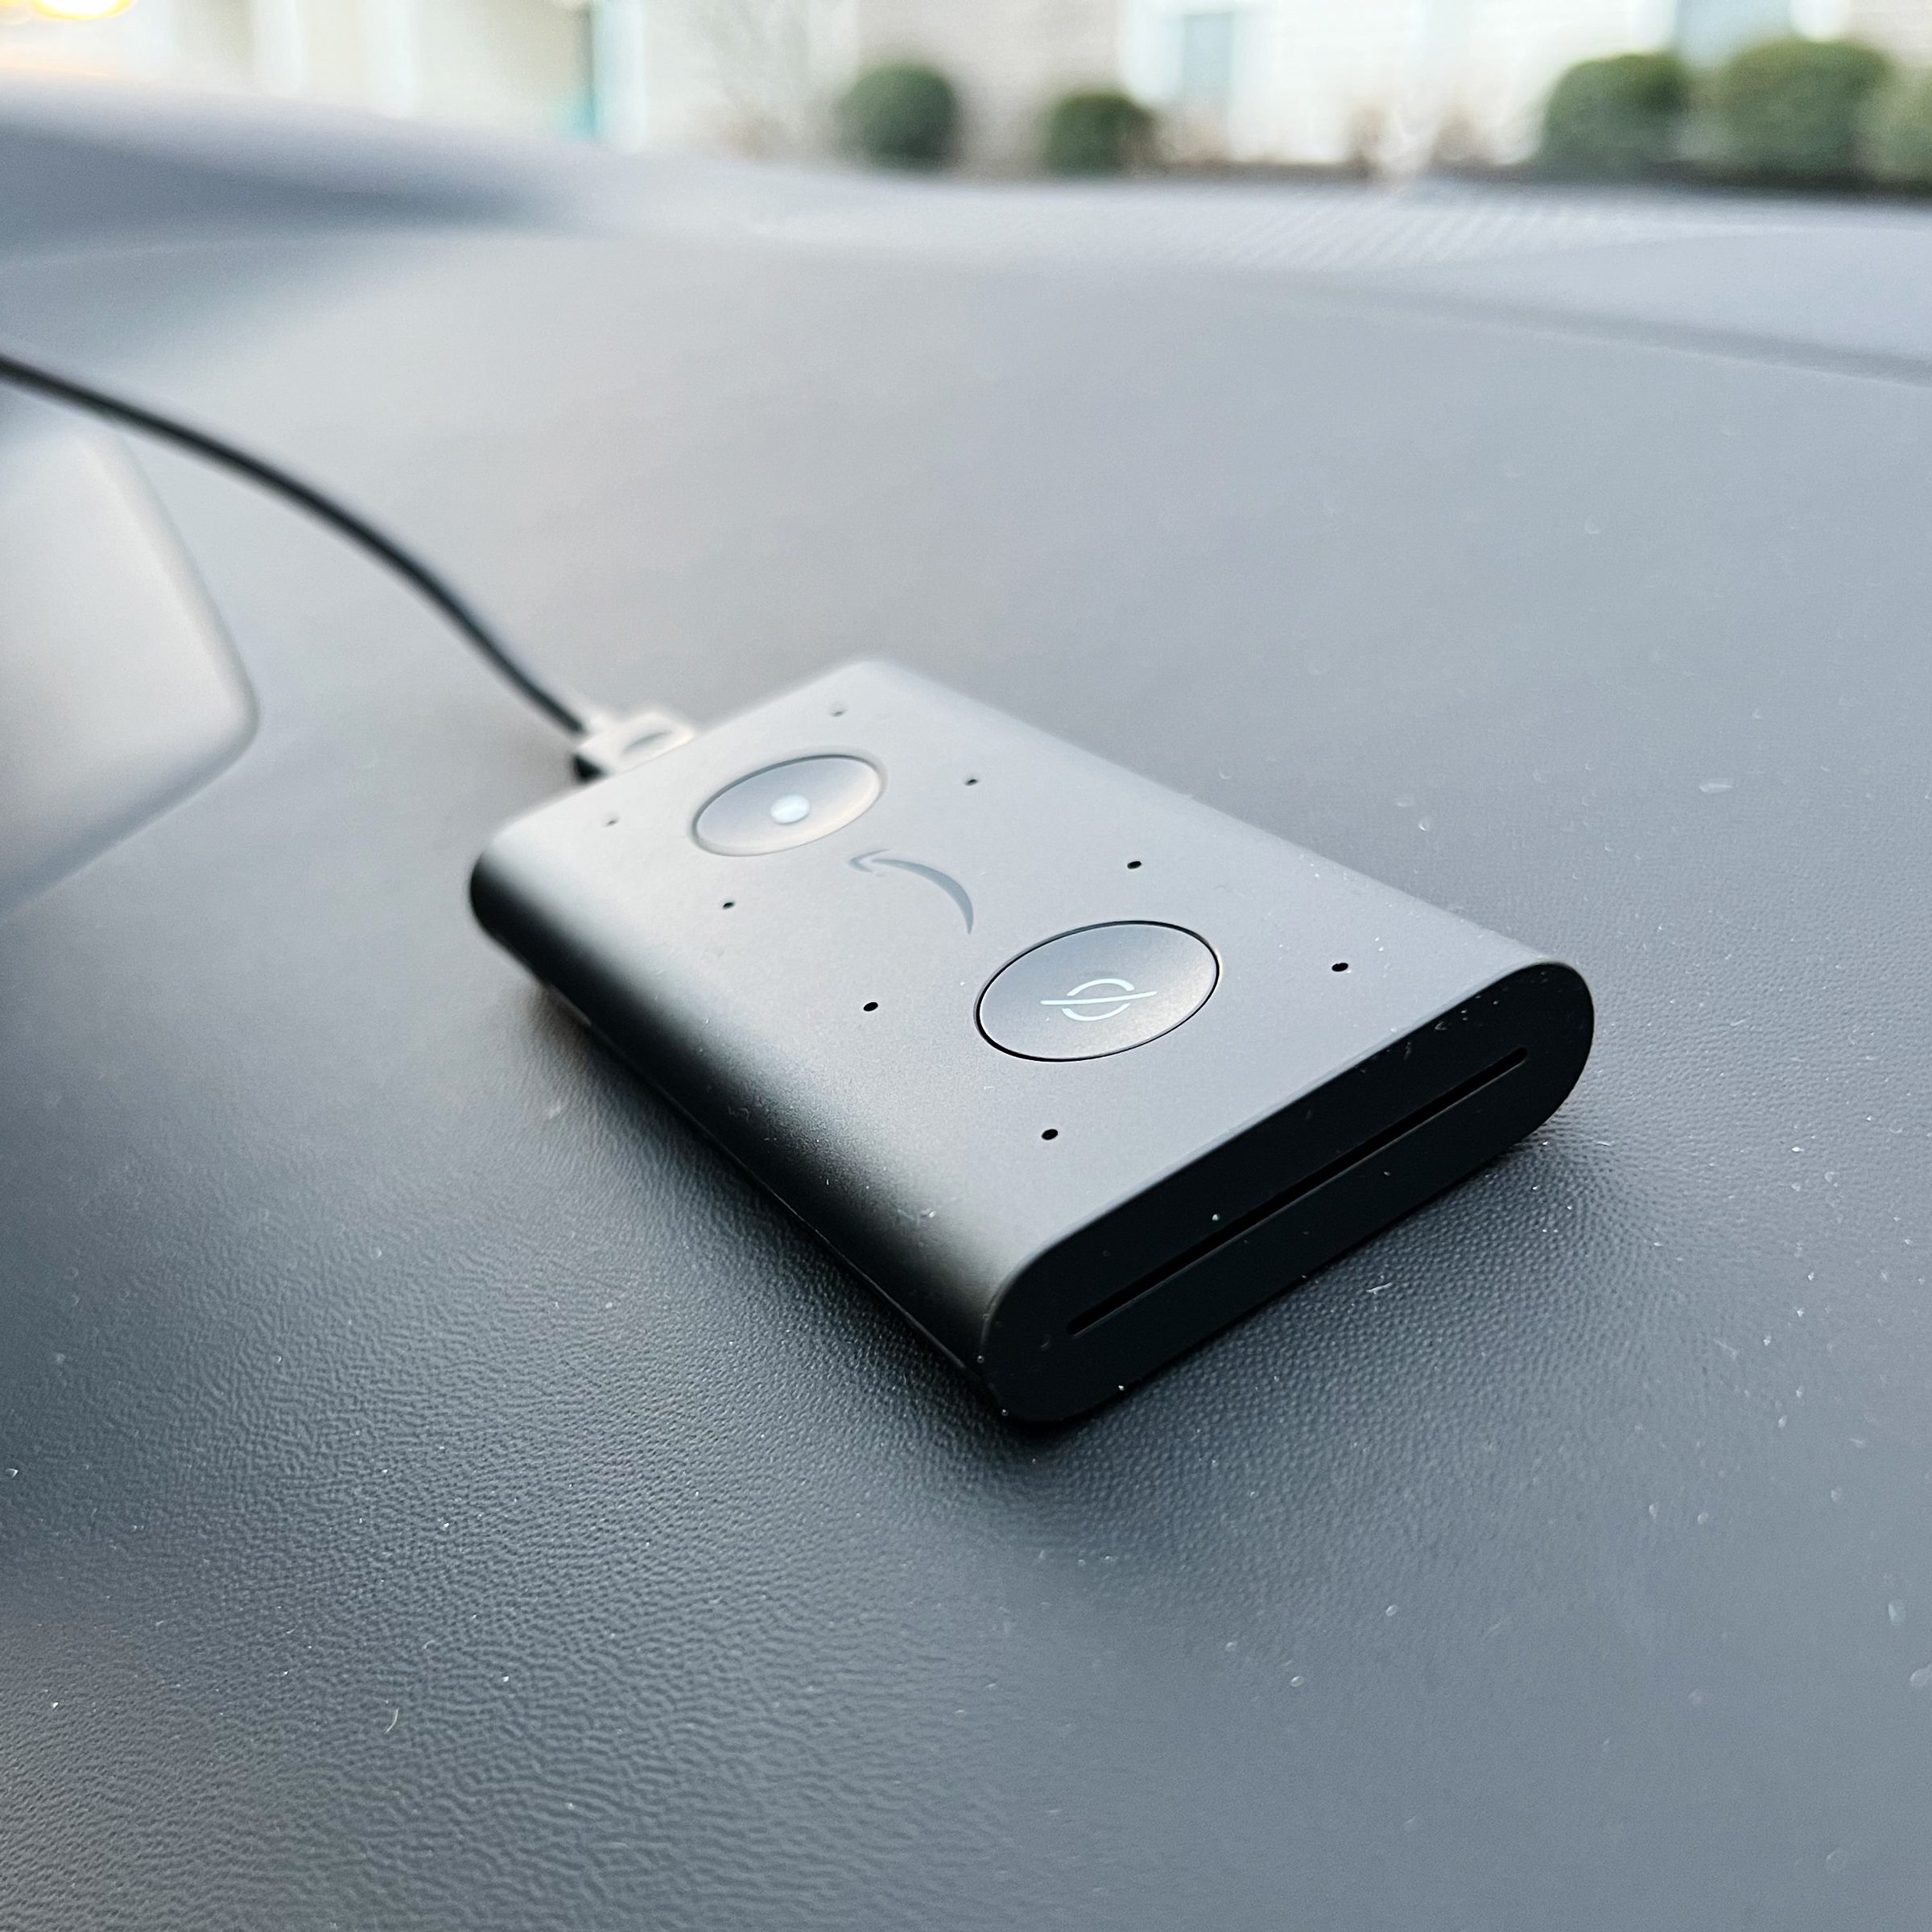 Echo Auto Is an Alexa Gadget for the Car